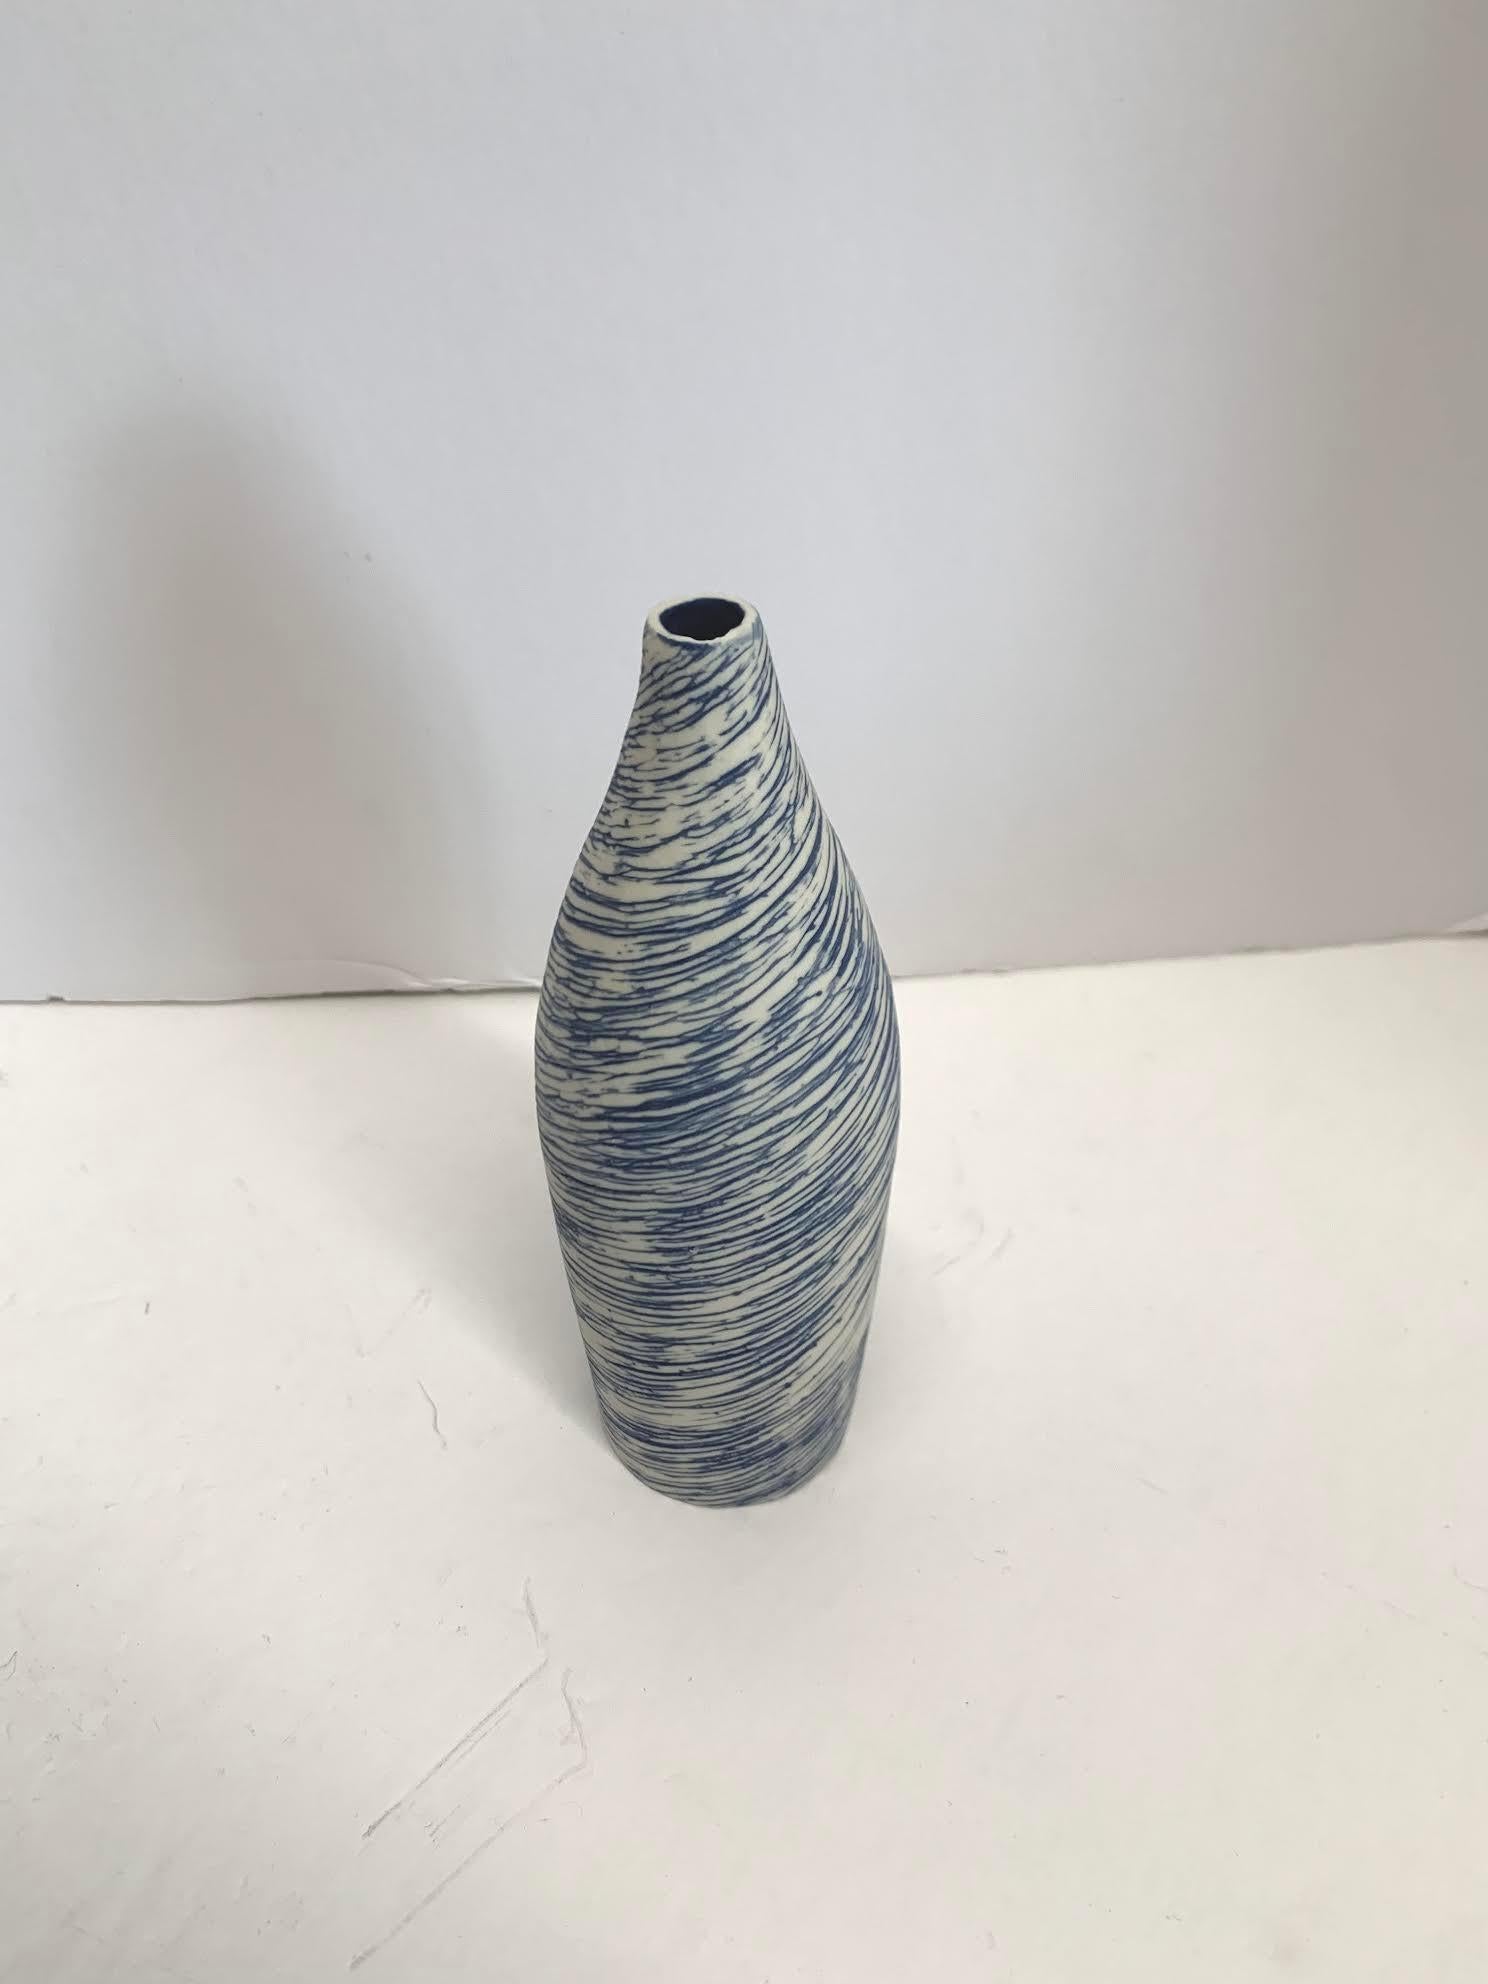 Contemporary Italian hand made ceramic blue and white swirl design vase.
Matte glaze.
Part of a large collection of blue and white diminutive vases.
See image #5.